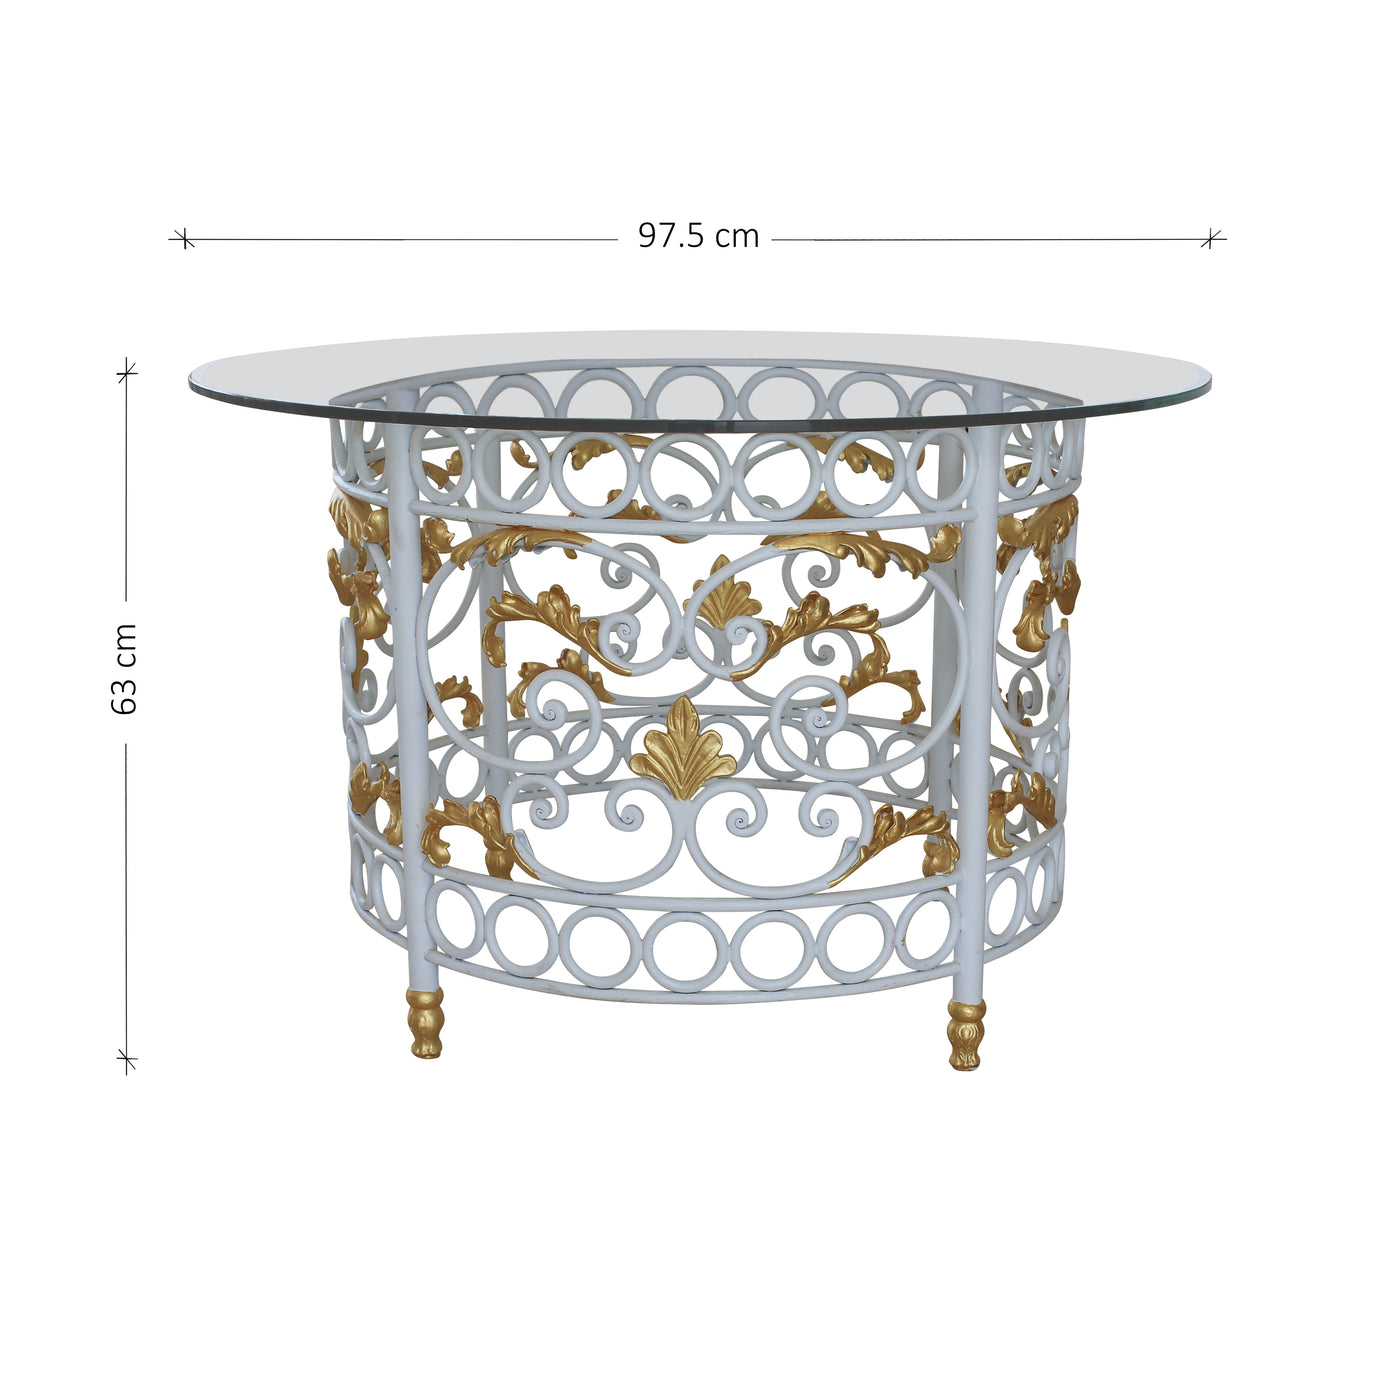 A classical round foyer table with a wrought iron base and a clear glass top; with annotated dimensions